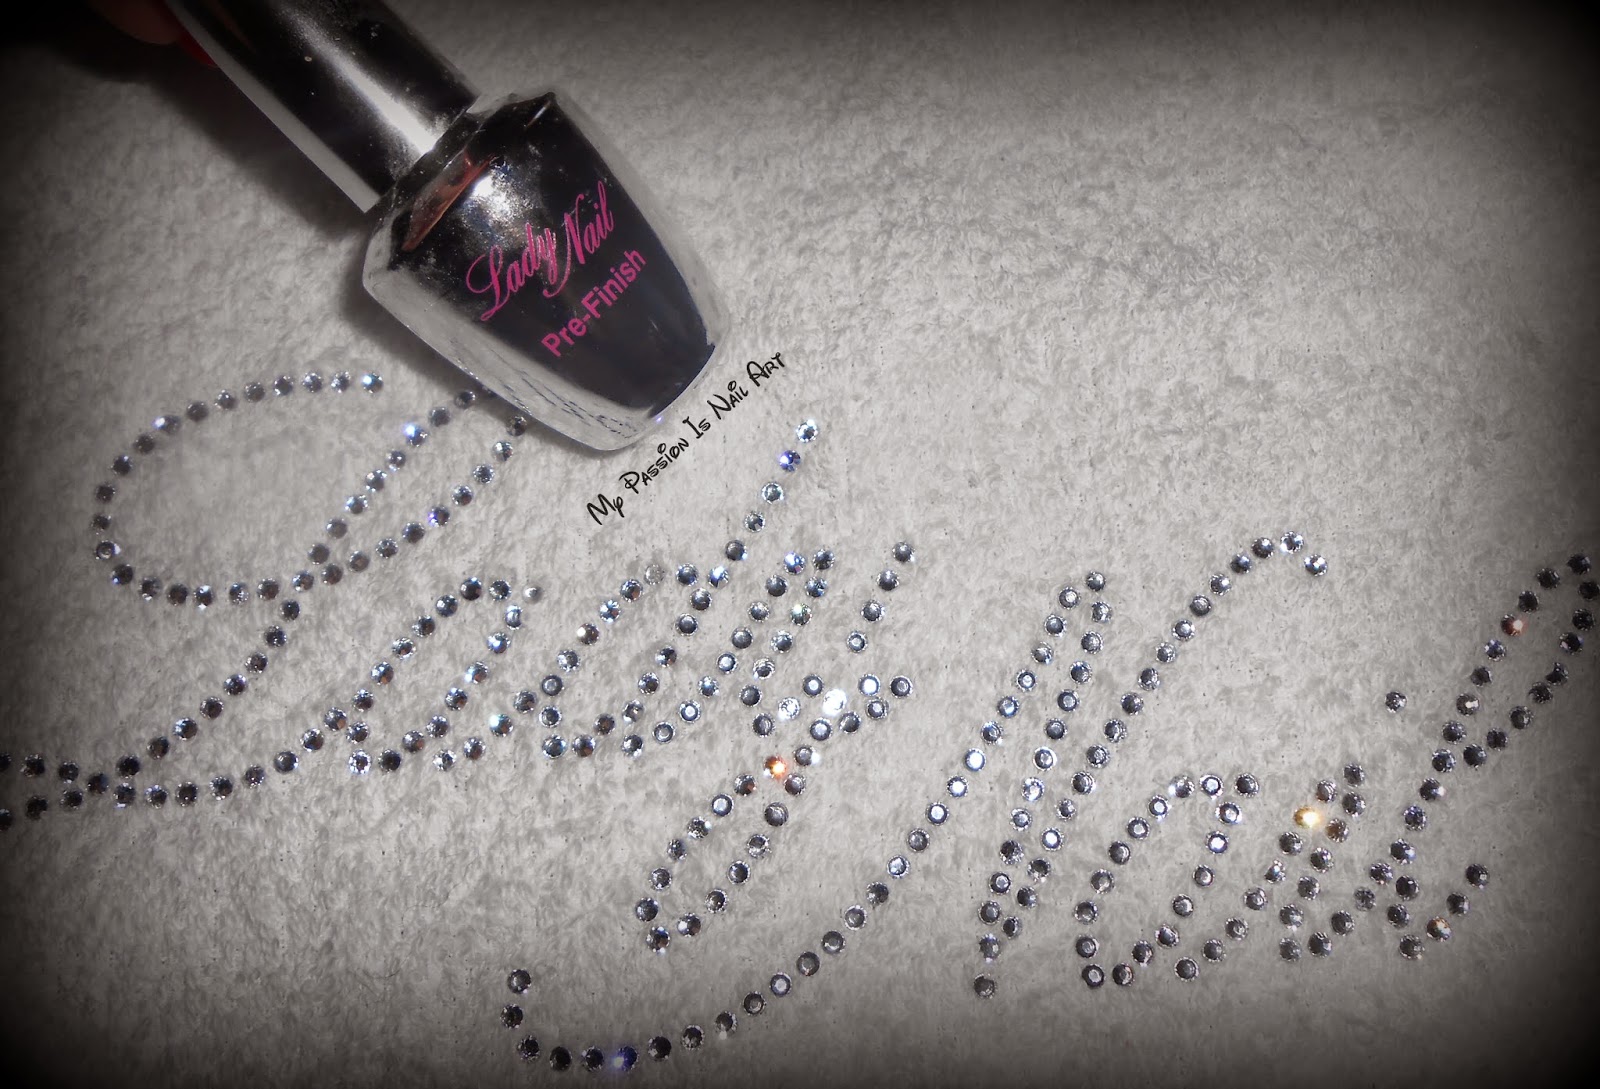 My Passion Is Nail Art: Recensione semipermanente Lady Nail